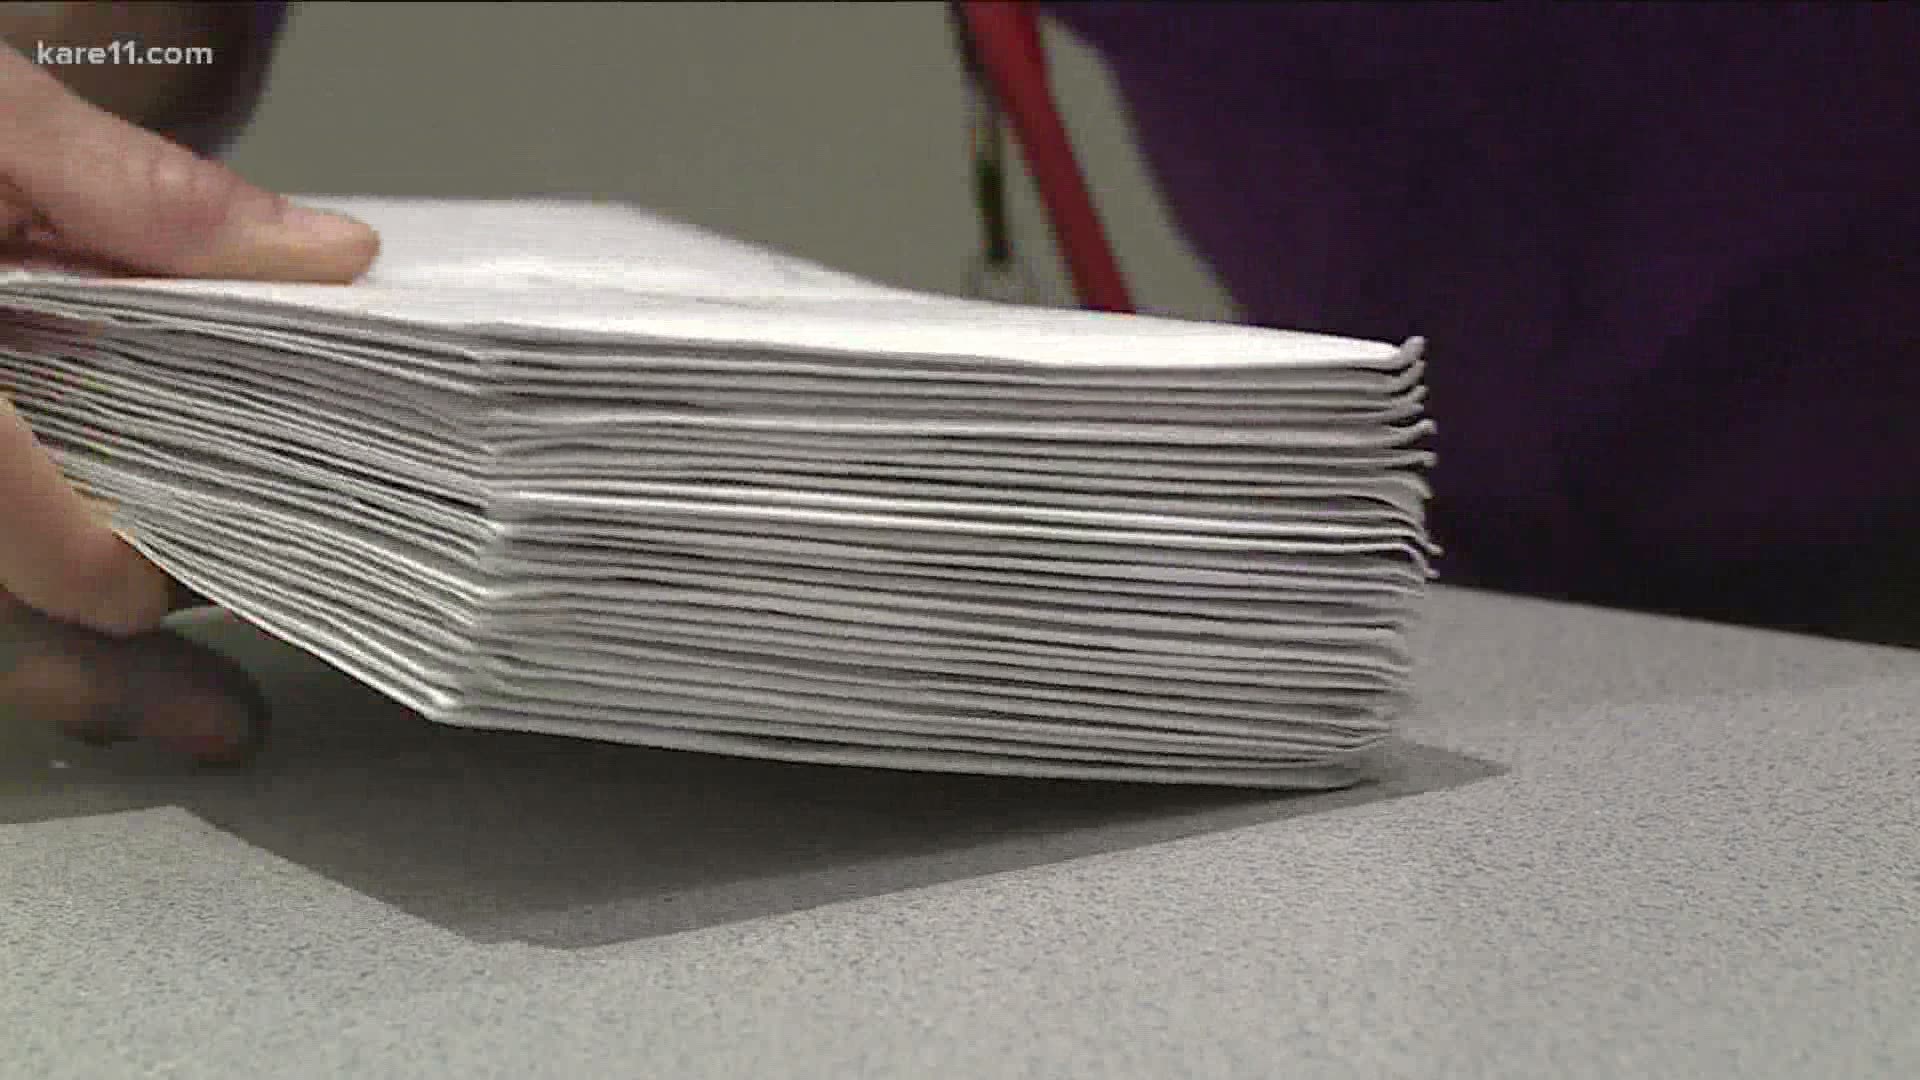 Rejected ballots are rare, but they do happen, so here's how to avoid it.